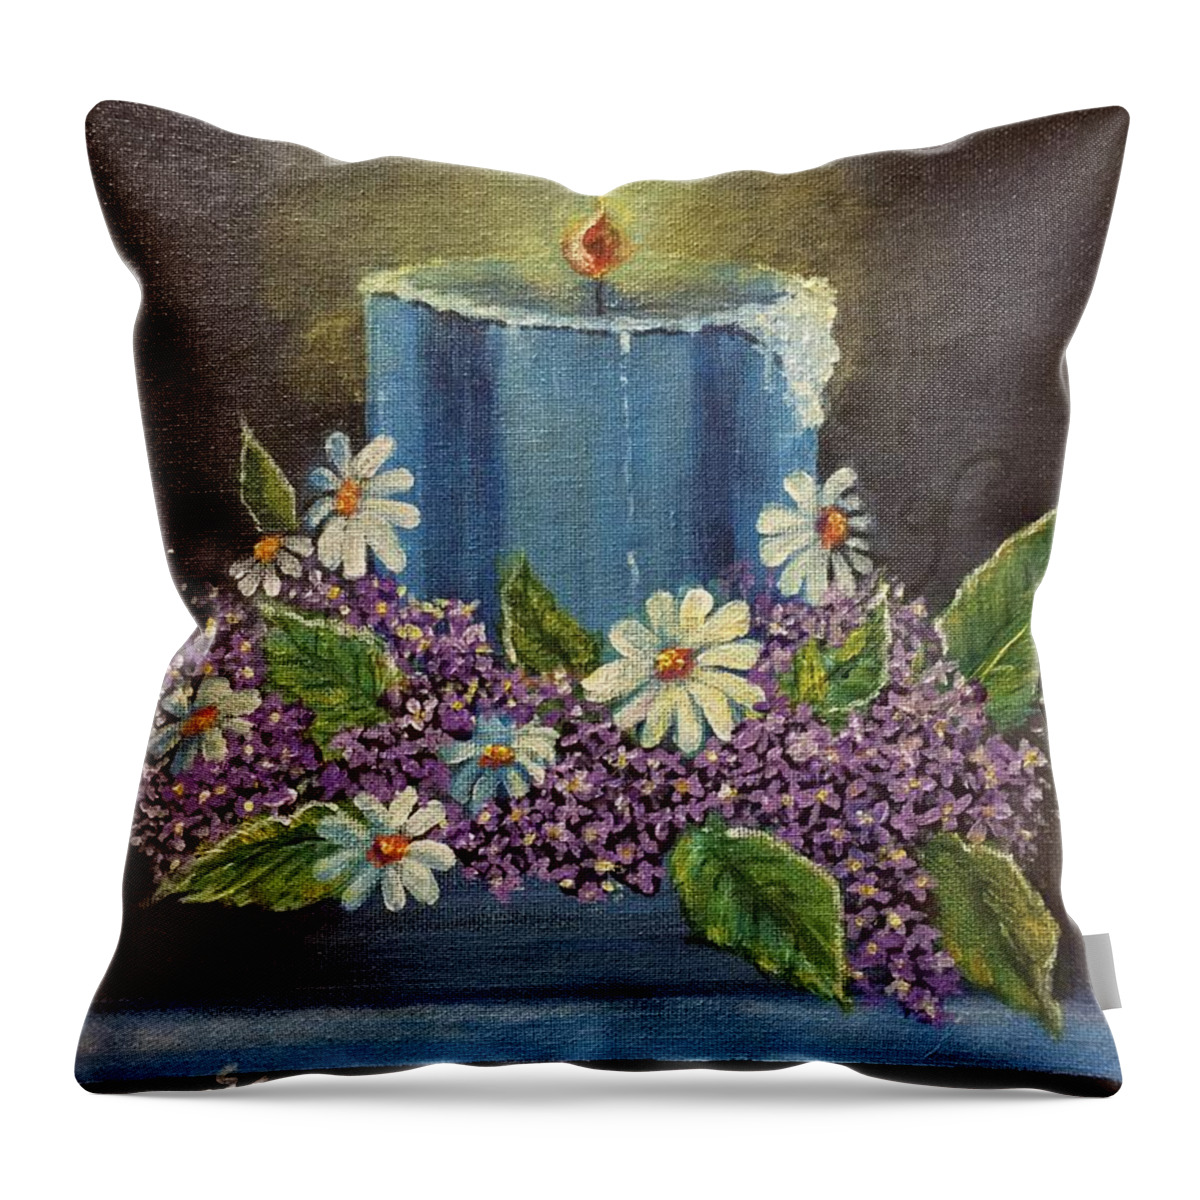 Still Life Throw Pillow featuring the painting Candle Glow Floral by Ronnie Egerton